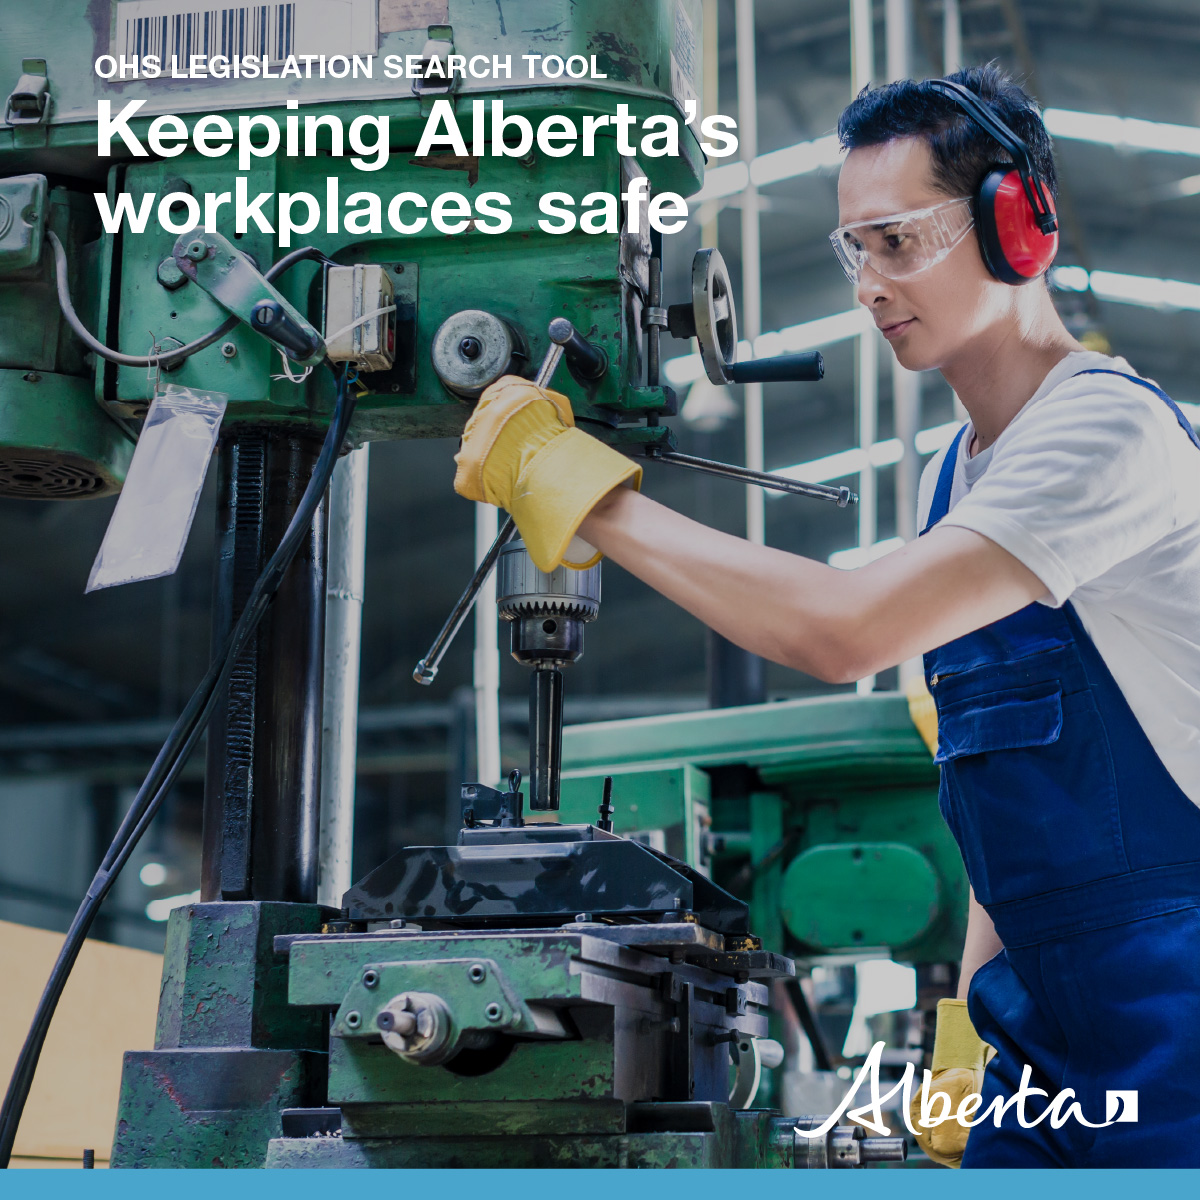 The OHS Legislation Search Tool was created to help Alberta workers and job creators keep their workplaces safe. It's easier than ever to understand the health and safety requirements relevant to your workplace. Use the OHS Legislation Search Tool: search-ohs-laws.alberta.ca